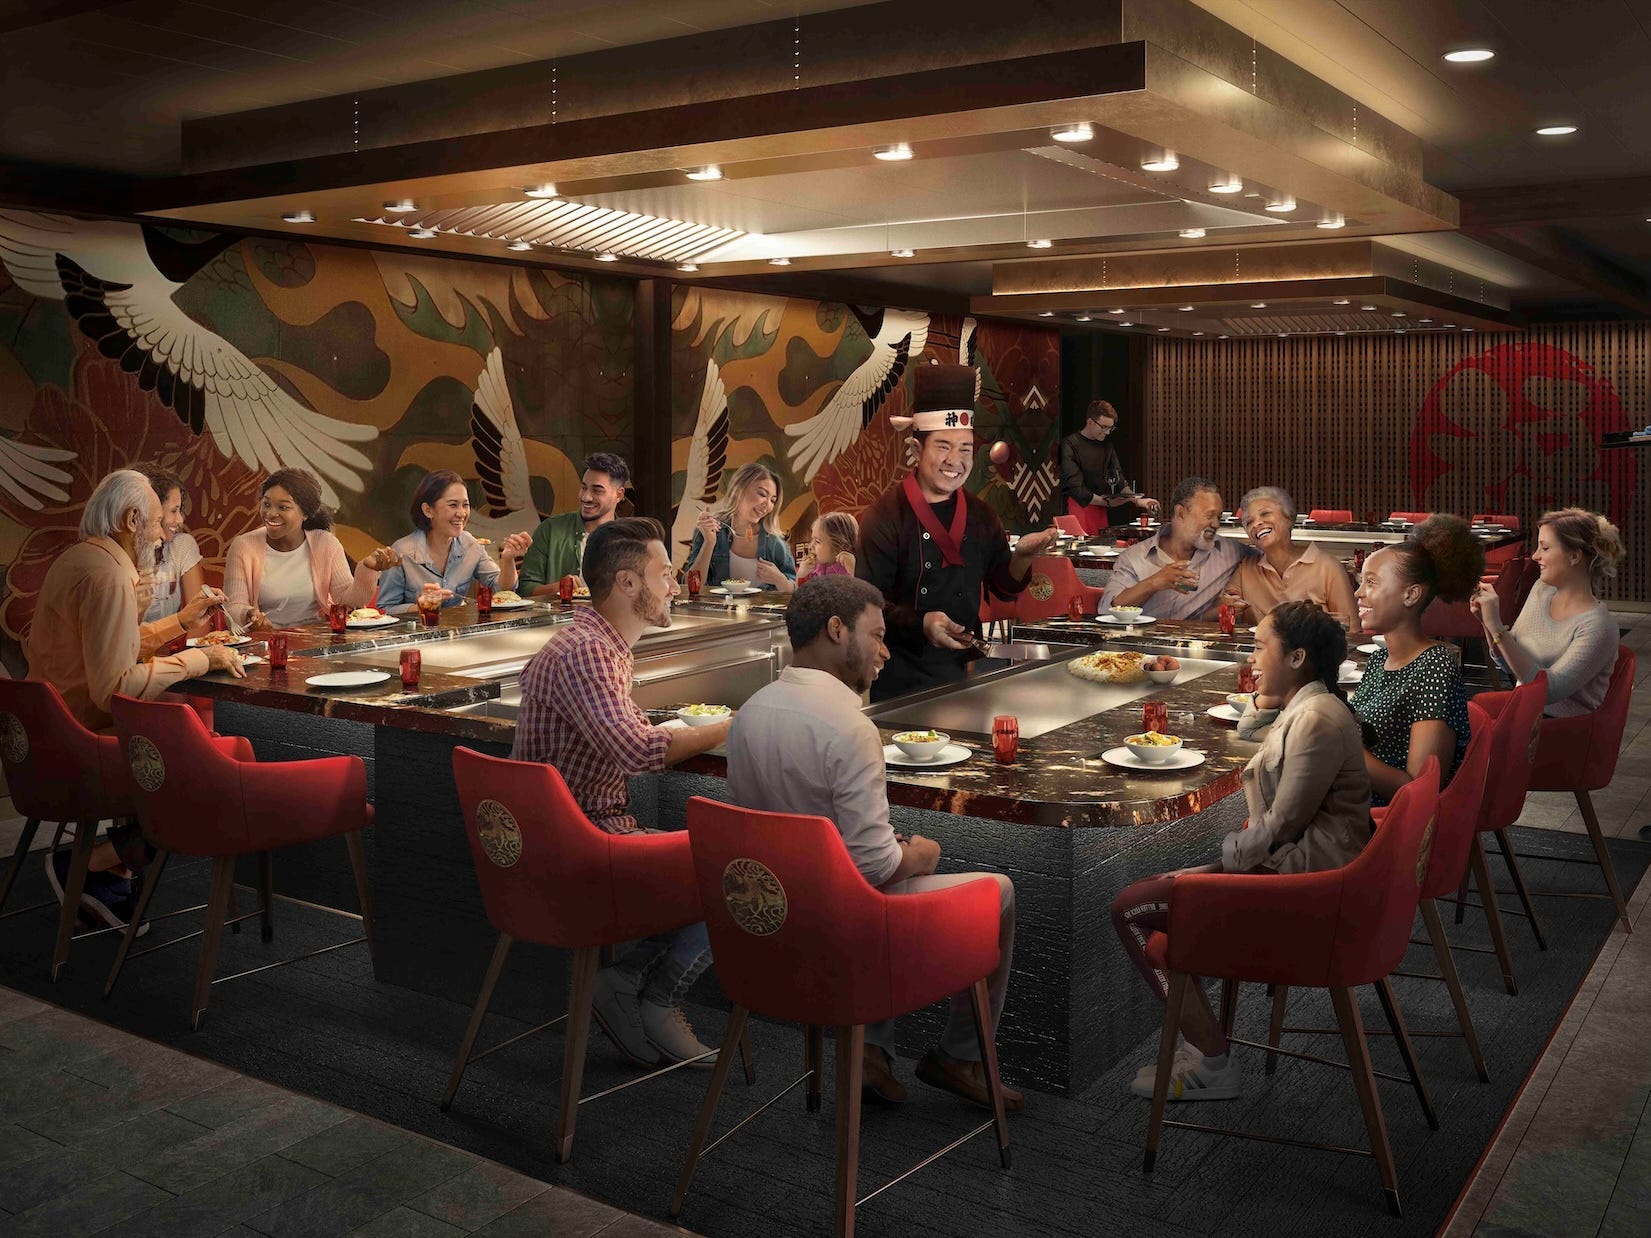 <p>Guests who prefer a more formal meal can head inside Izumi for Royal Caribbean's first omakase option. Just be prepared to <a href="https://www.royalcaribbean.com/account/cruise-planner/category/pt_dining/product/UT_OMKSDINNER?bookingId=000000&sailDate=20240802&shipCode=UT">pay</a> about $130 per person.</p><p>Thankfully, the dinner includes a sake cocktail pairing.</p><p>If that's not enough, explore the ship's more than 20 bars and lounges.</p>